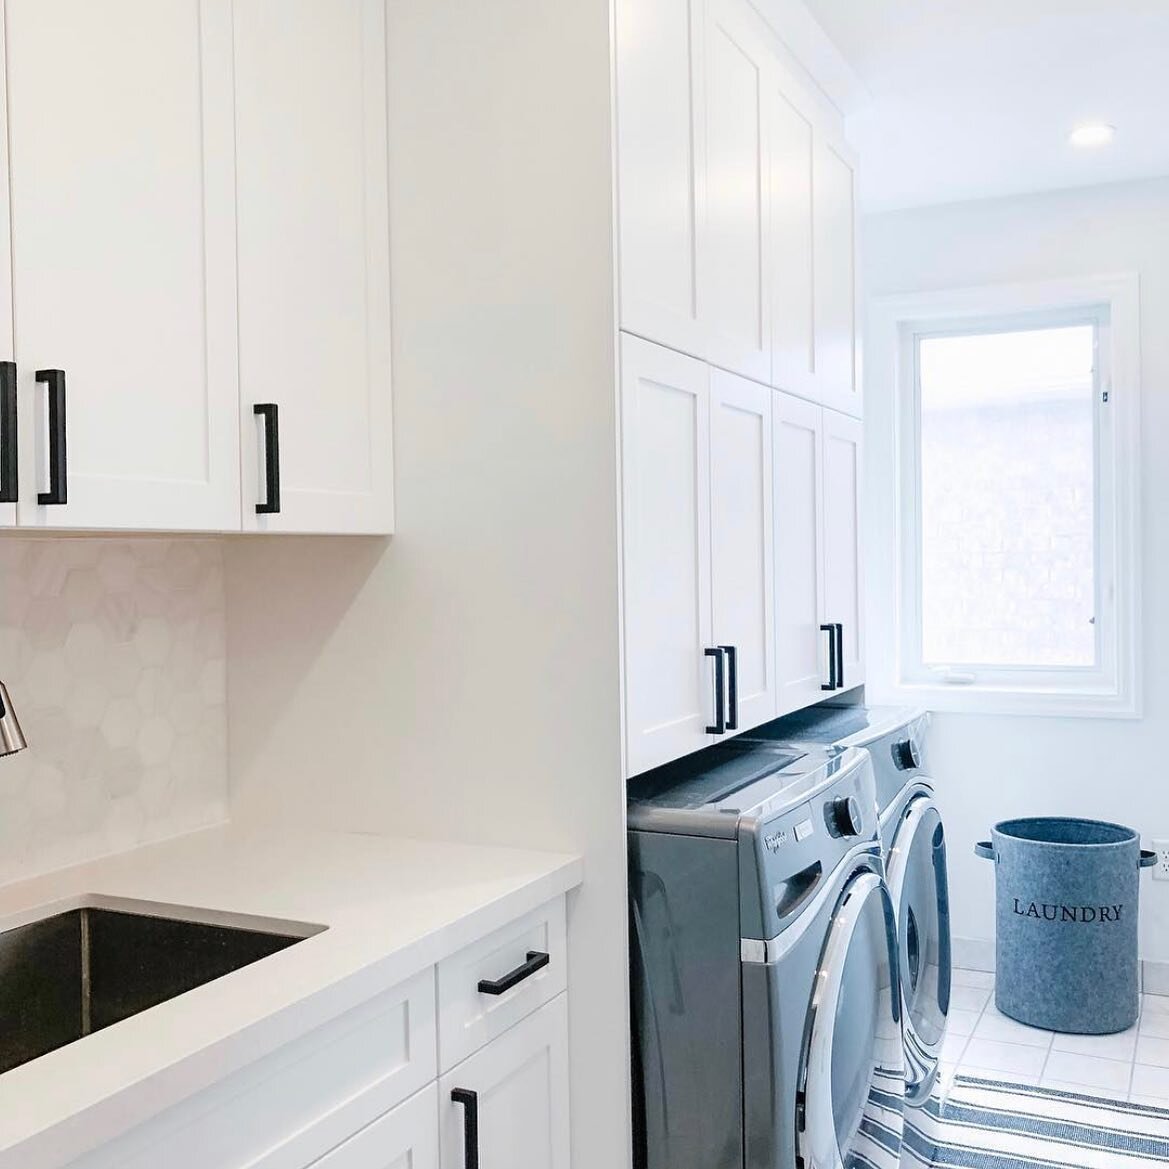 We promise&hellip; you will enjoy doing your laundry a whole lot more when you&rsquo;ve got a beautiful space like this 😍

#laundryroommakeover #laundryroom #laundryroomcabinets #mudroommakeover #kitchener #waterloo